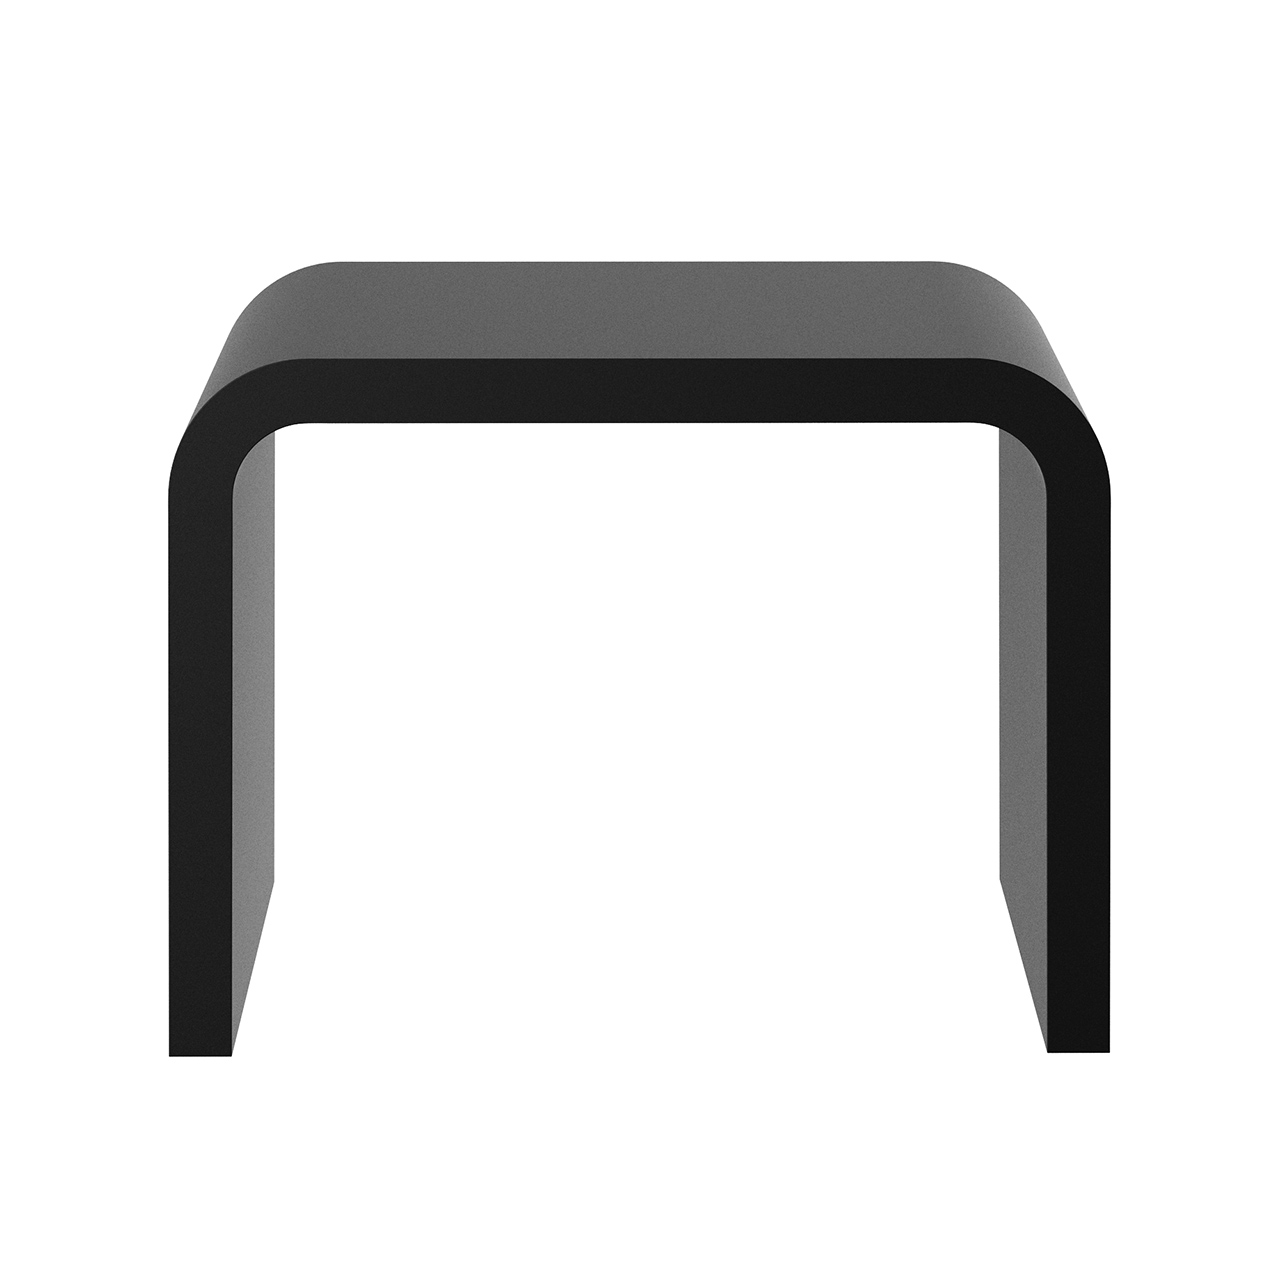 Black Stone Stool by Decor Walther